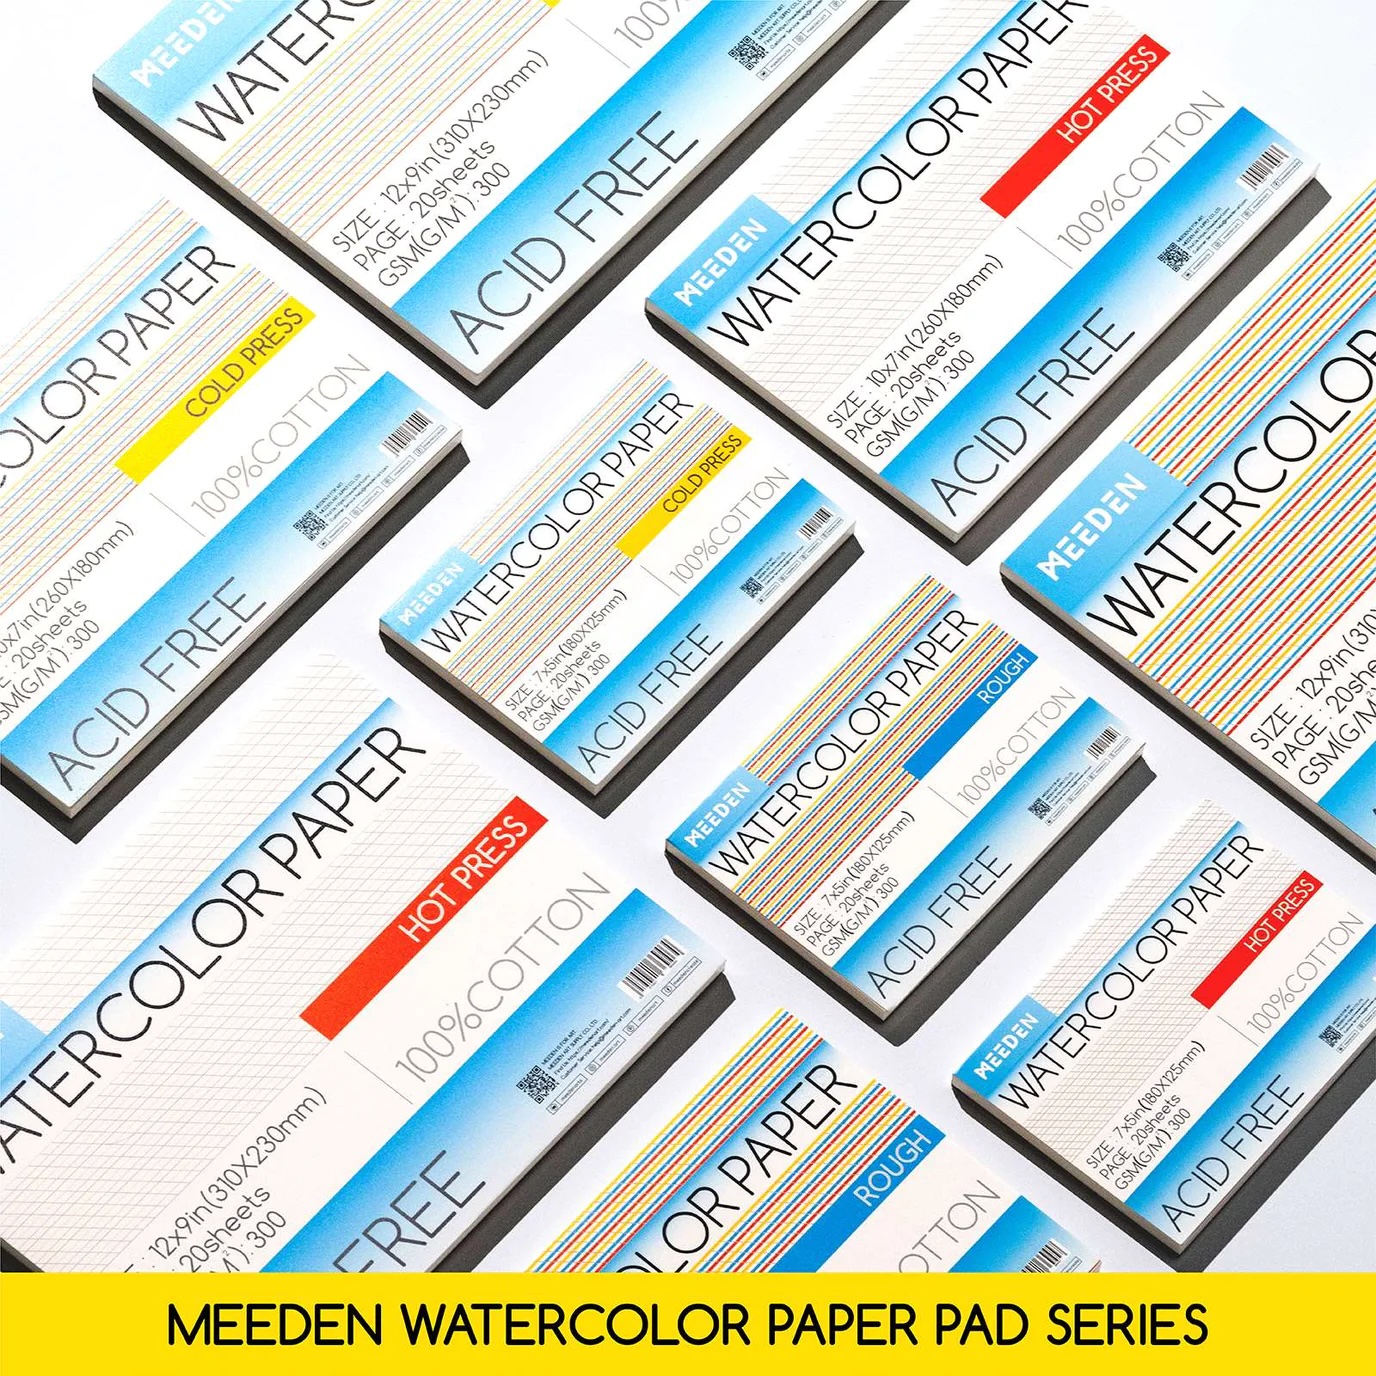 Are Meeden & Academy Watercolor Papers The Same? - Live Art & Chat